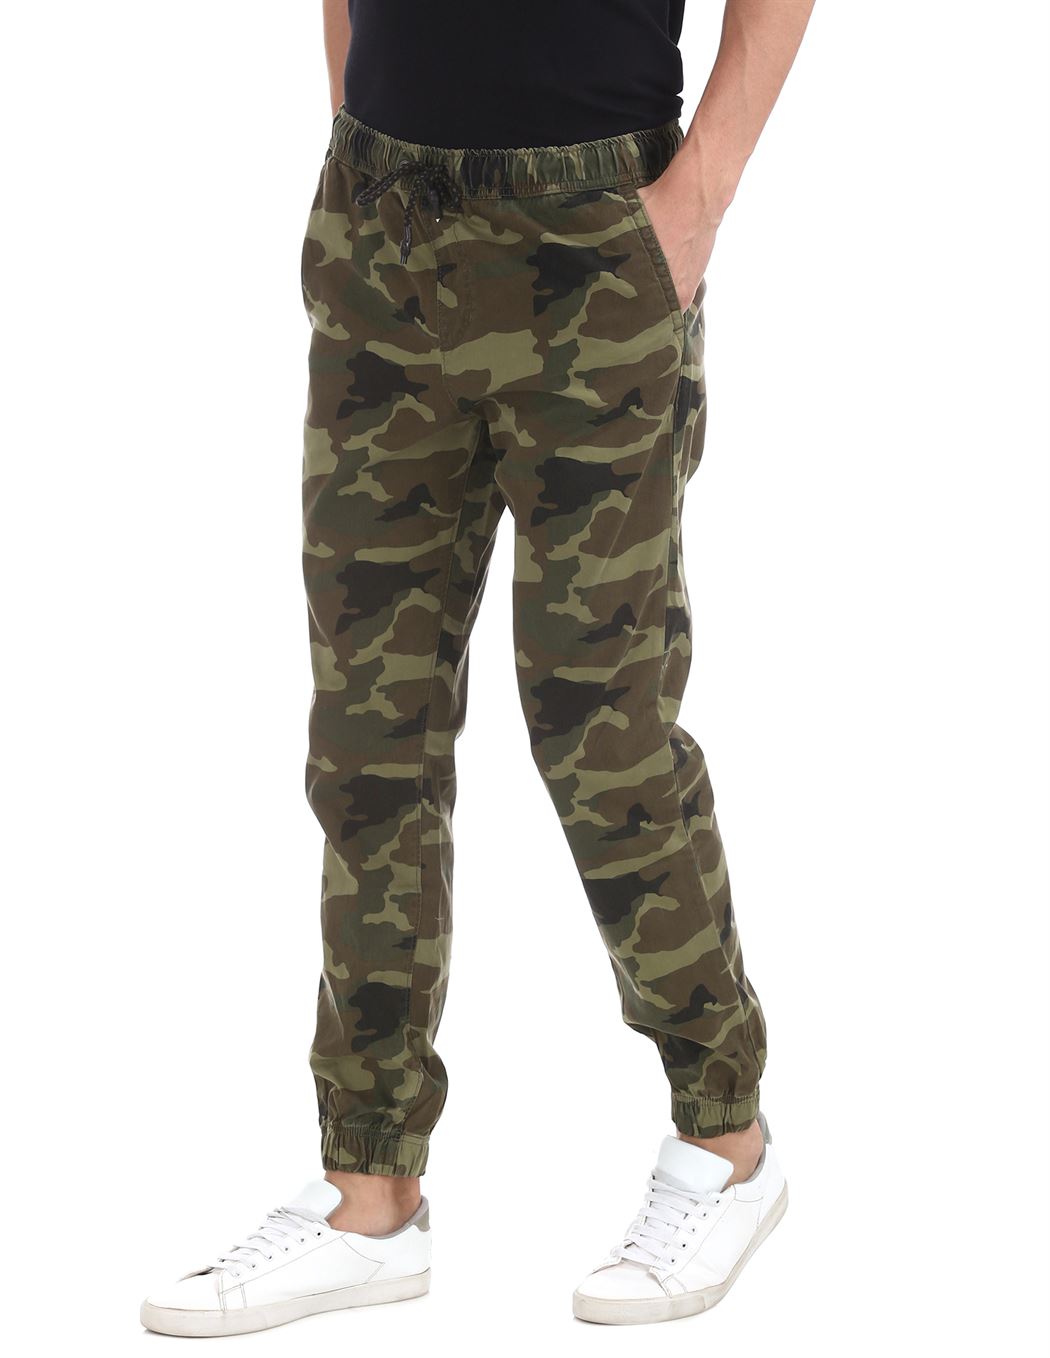 Aeropostale Men Casual Wear Military Camouflage Trouser